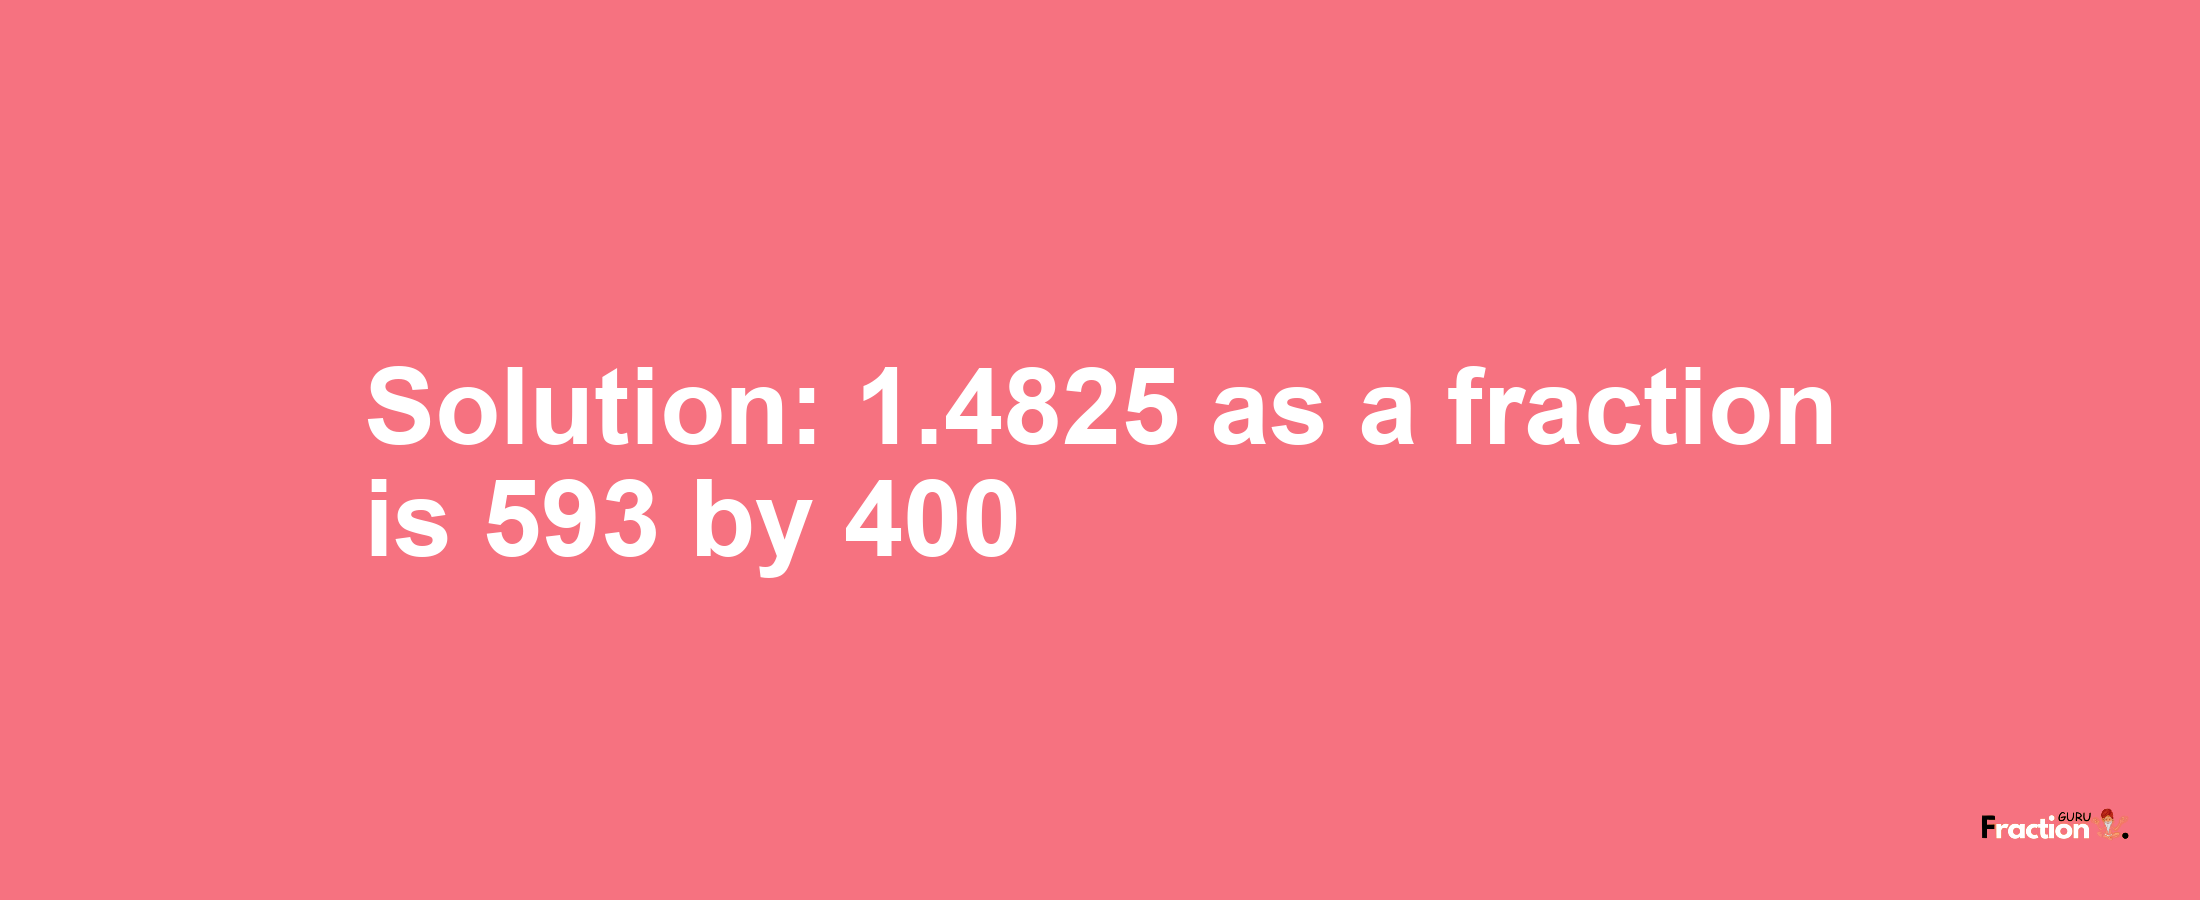 Solution:1.4825 as a fraction is 593/400